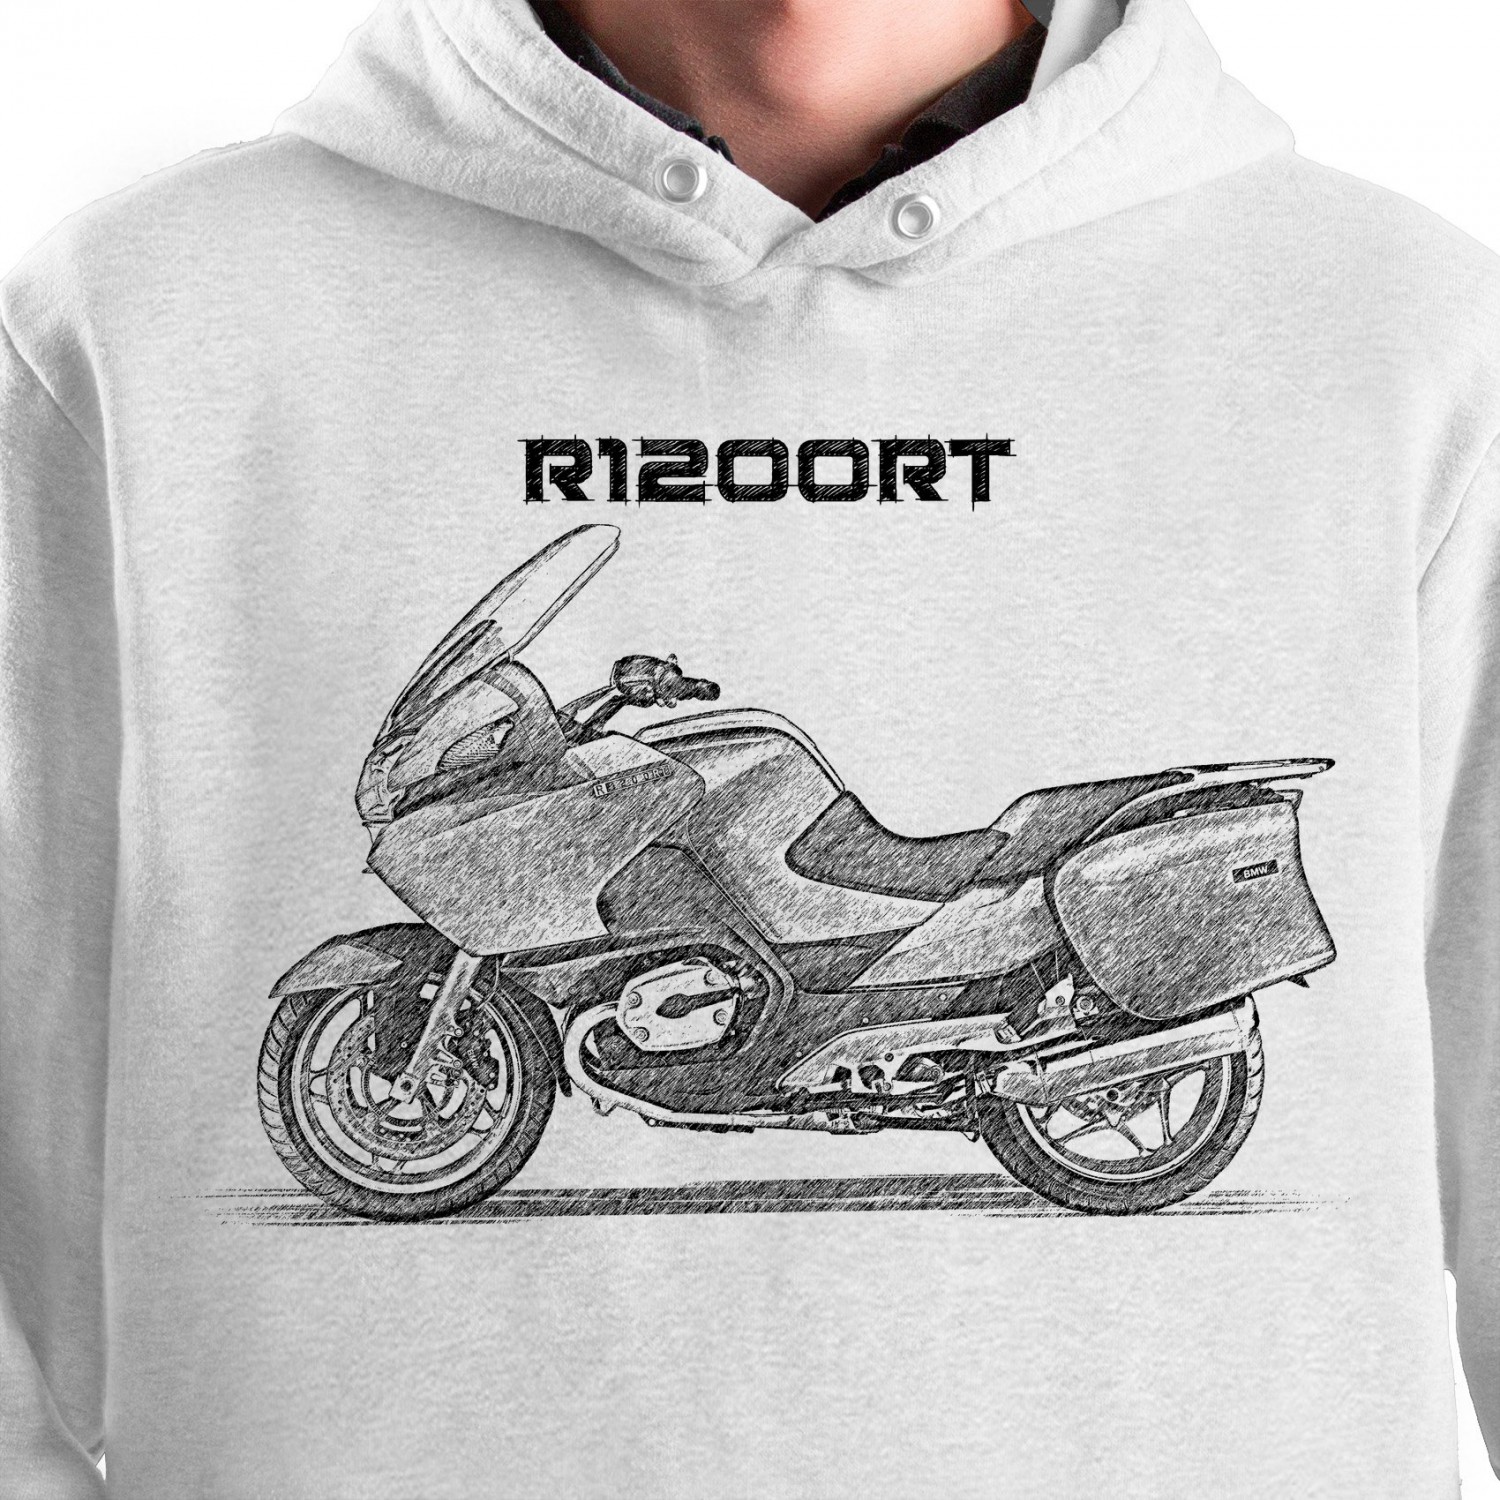 White T-shirt with BMW R1200 RT. Gift for motorcyclist.